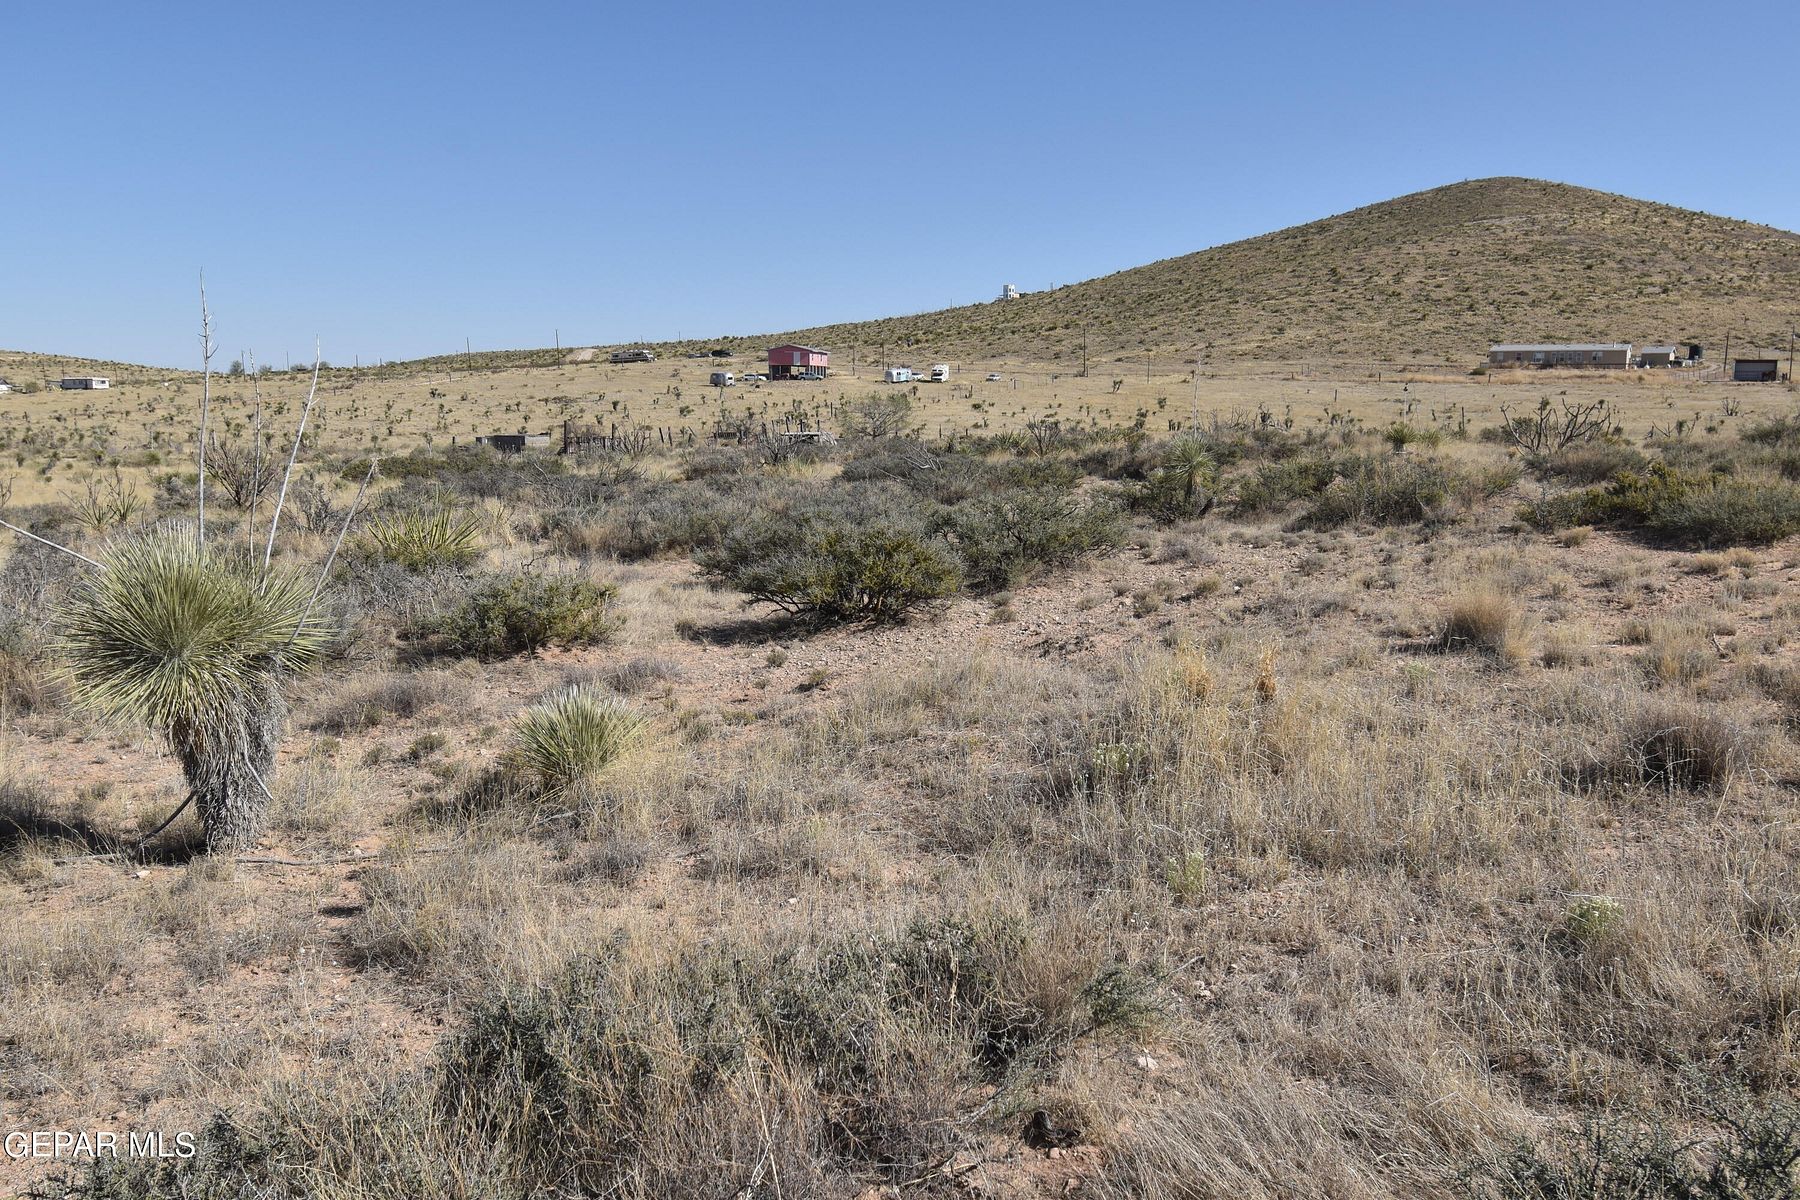 10 Acres of Residential Land for Sale in El Paso, Texas